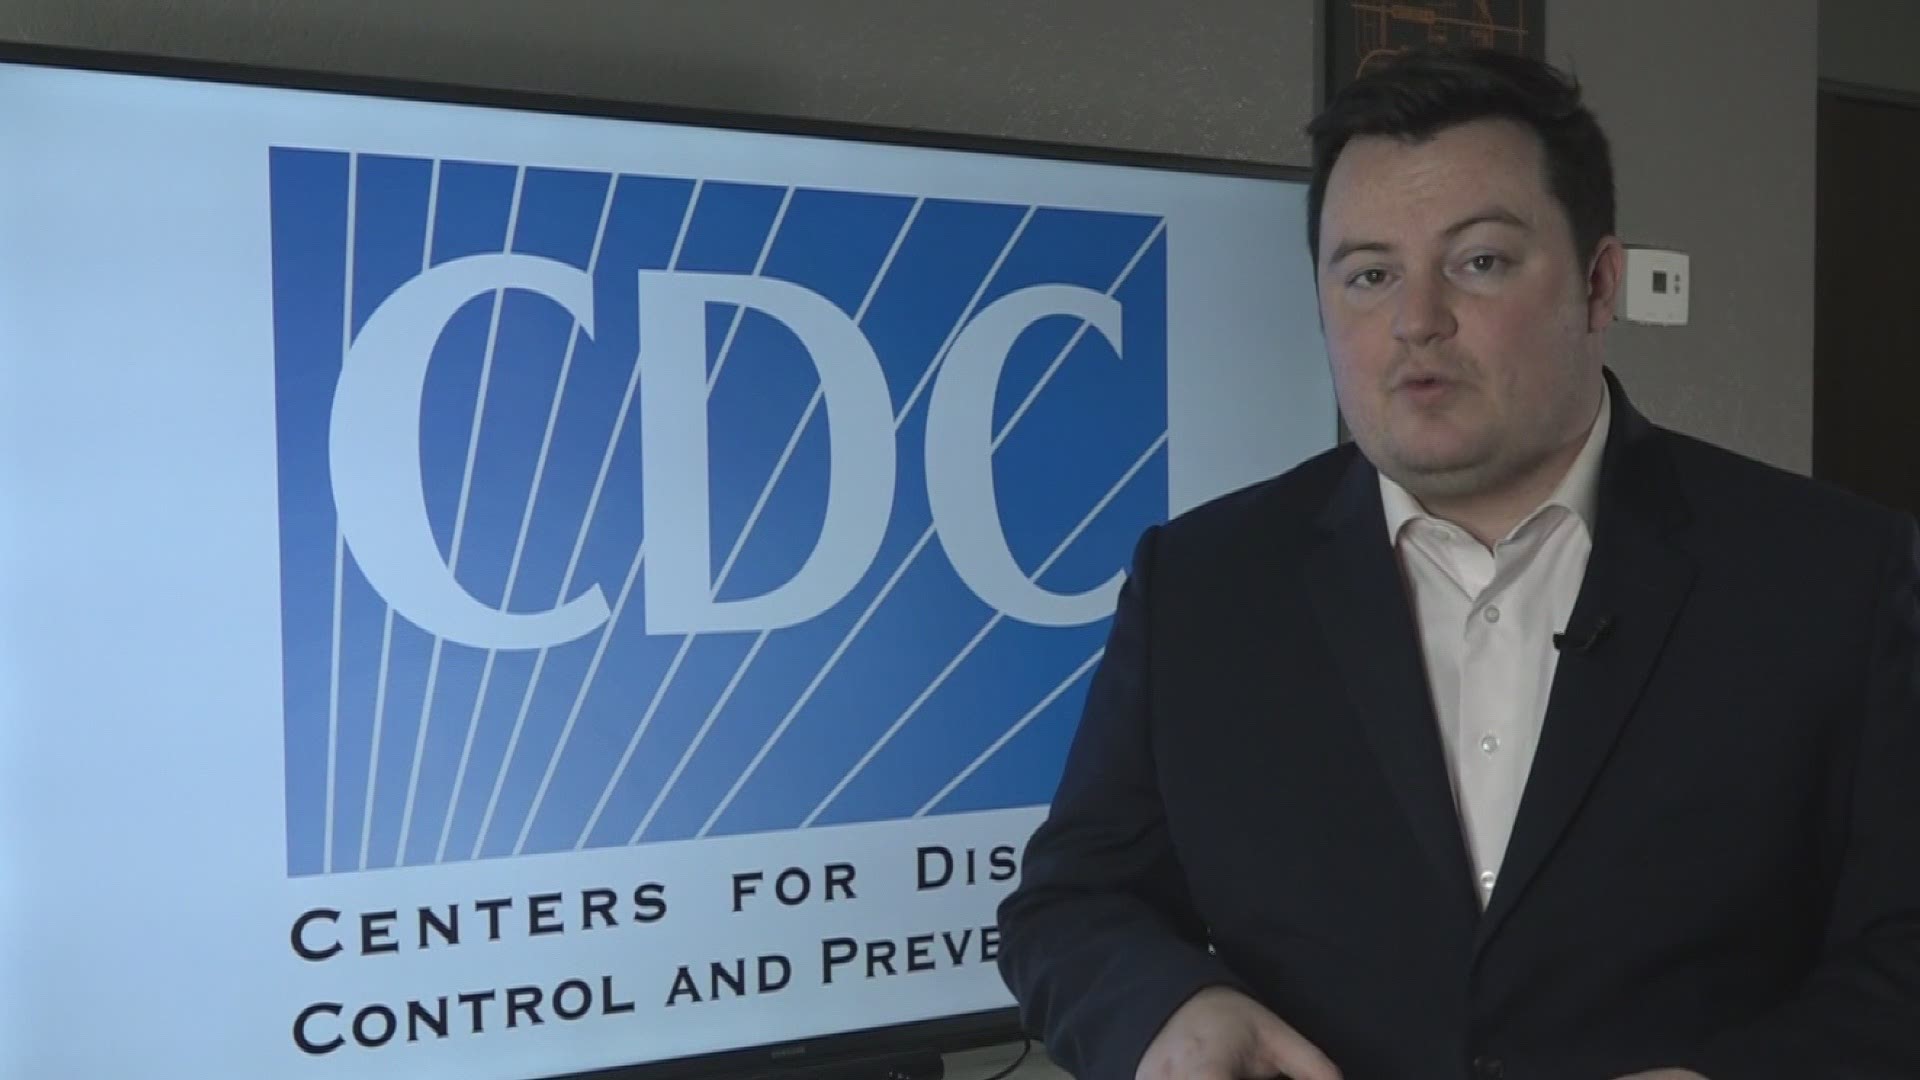 The CDC says it has teams on the ground in Michigan working closely with state health officials.